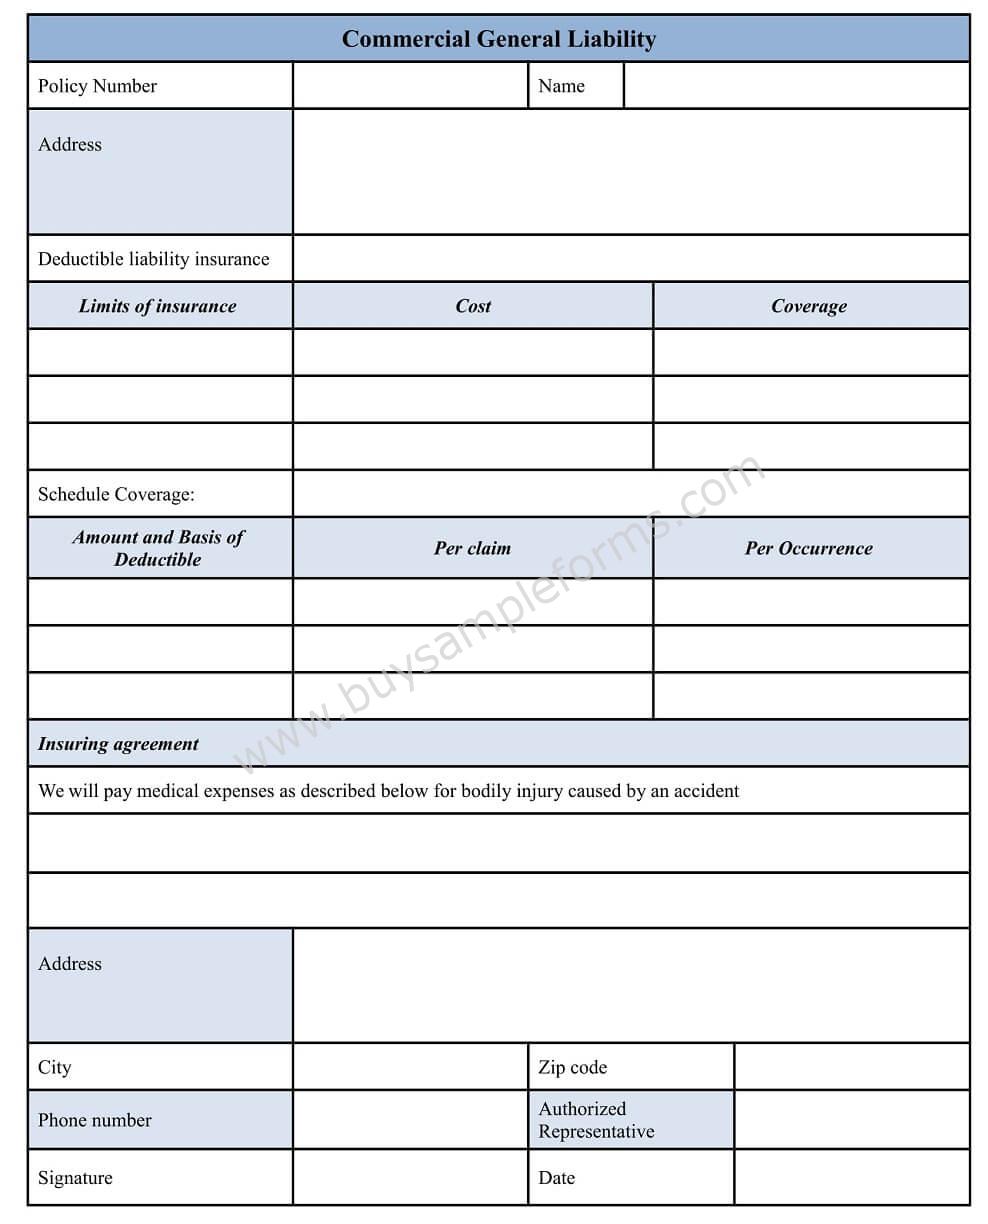 Download Commercial General Liability Form In Word Format Sample CGL 